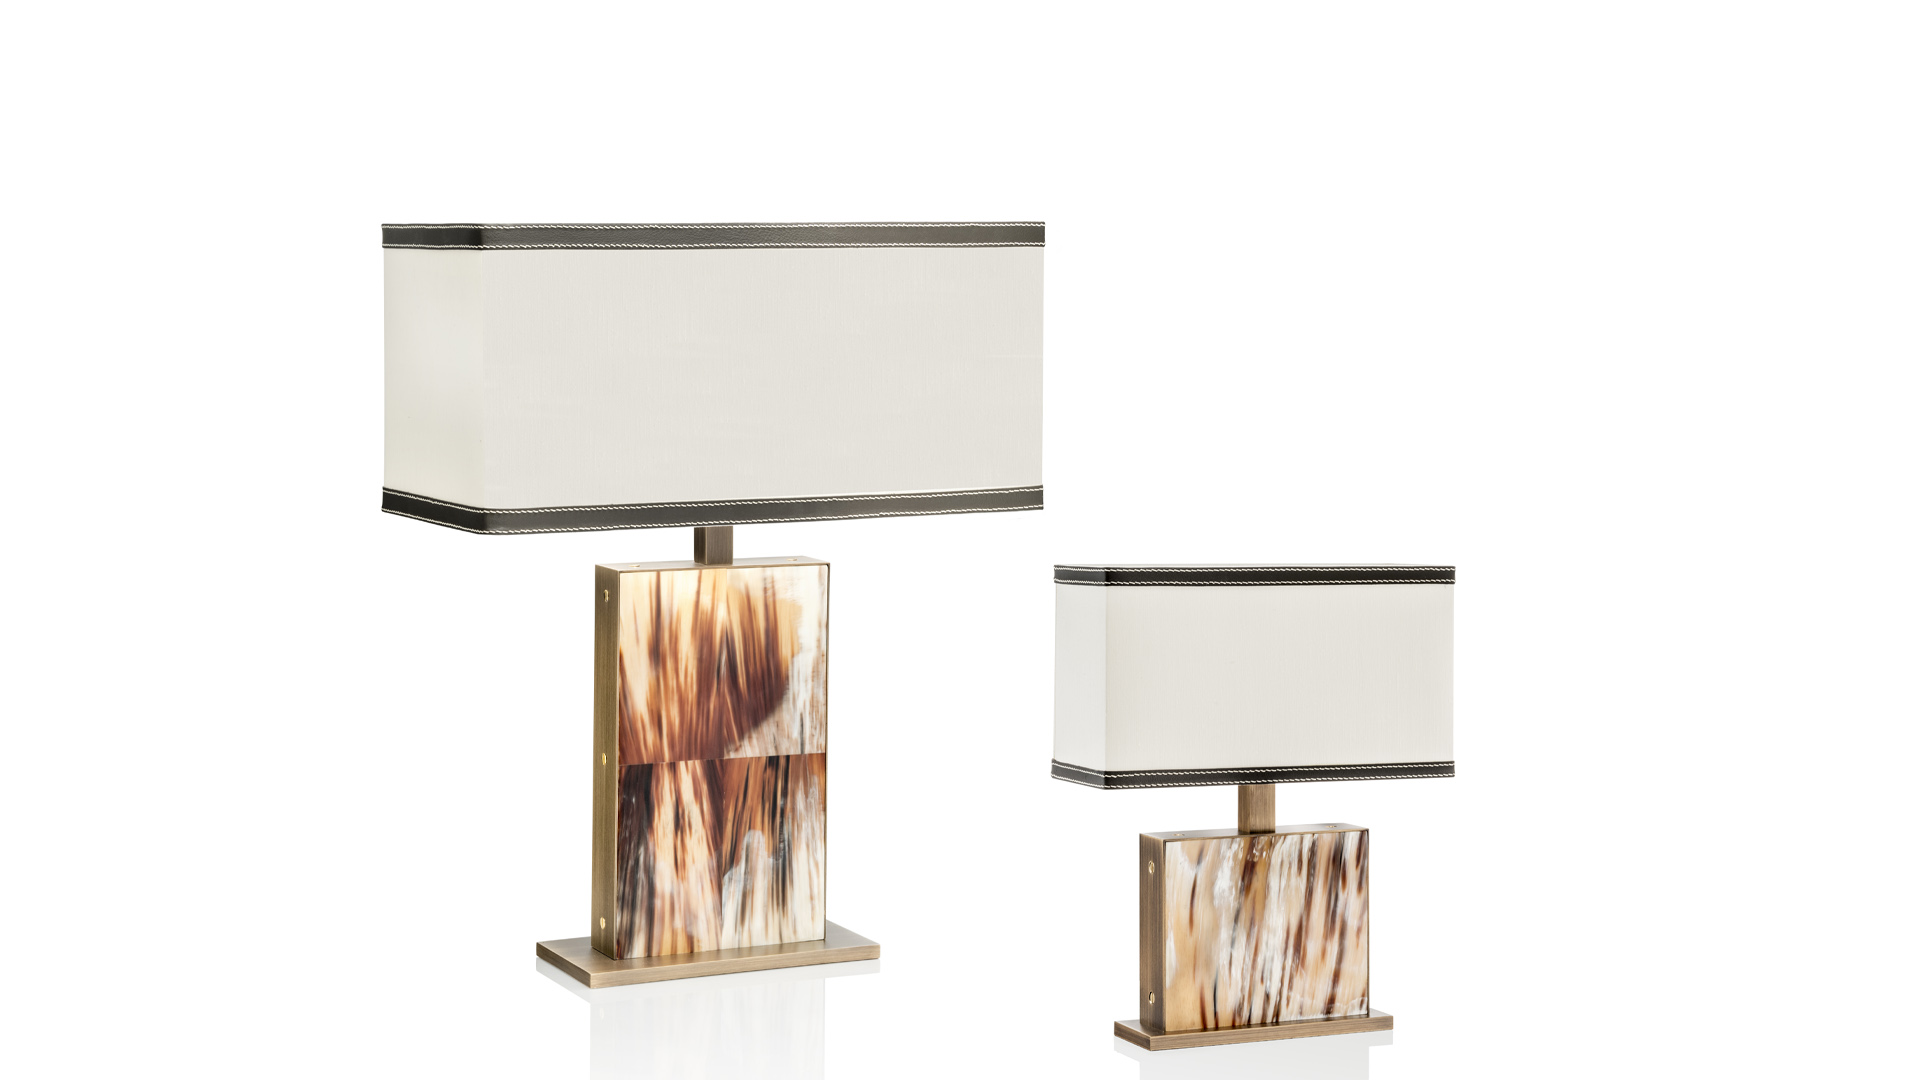 Lamps - Florian table lamps in horn and burnished brass - cover - Arcahorn